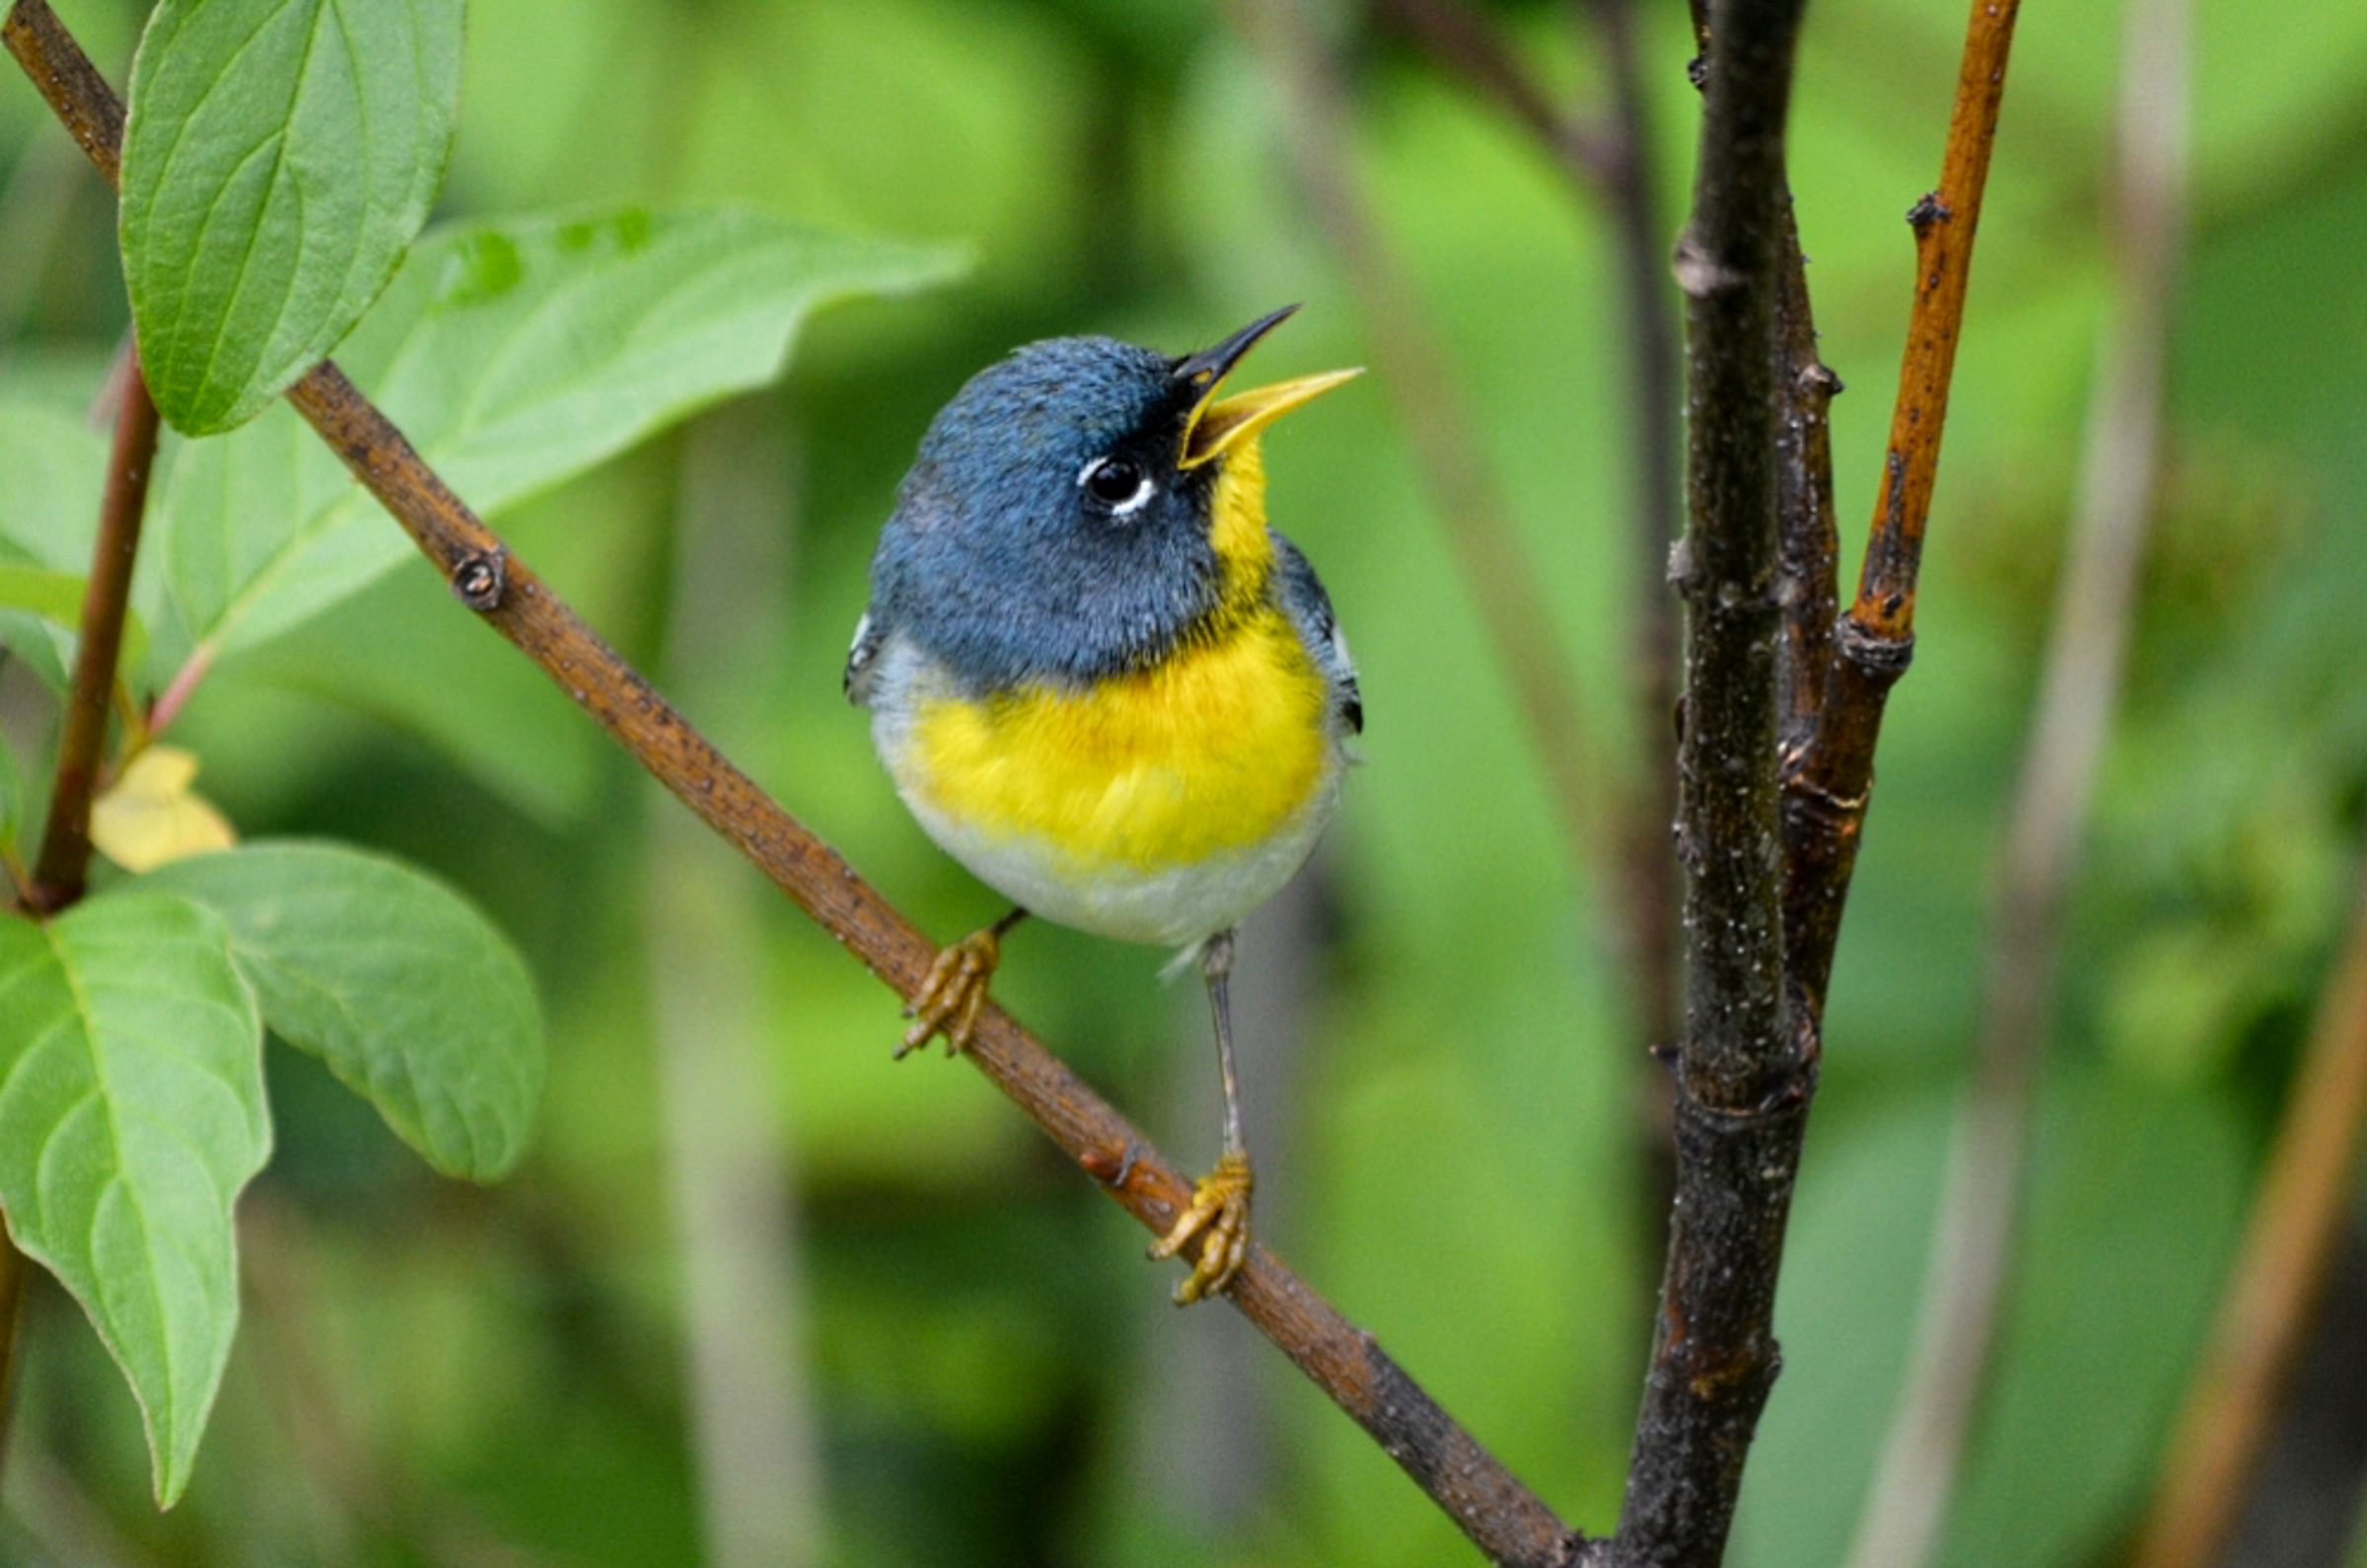 Northern Parula stands on a branch, with green leaves in the background.